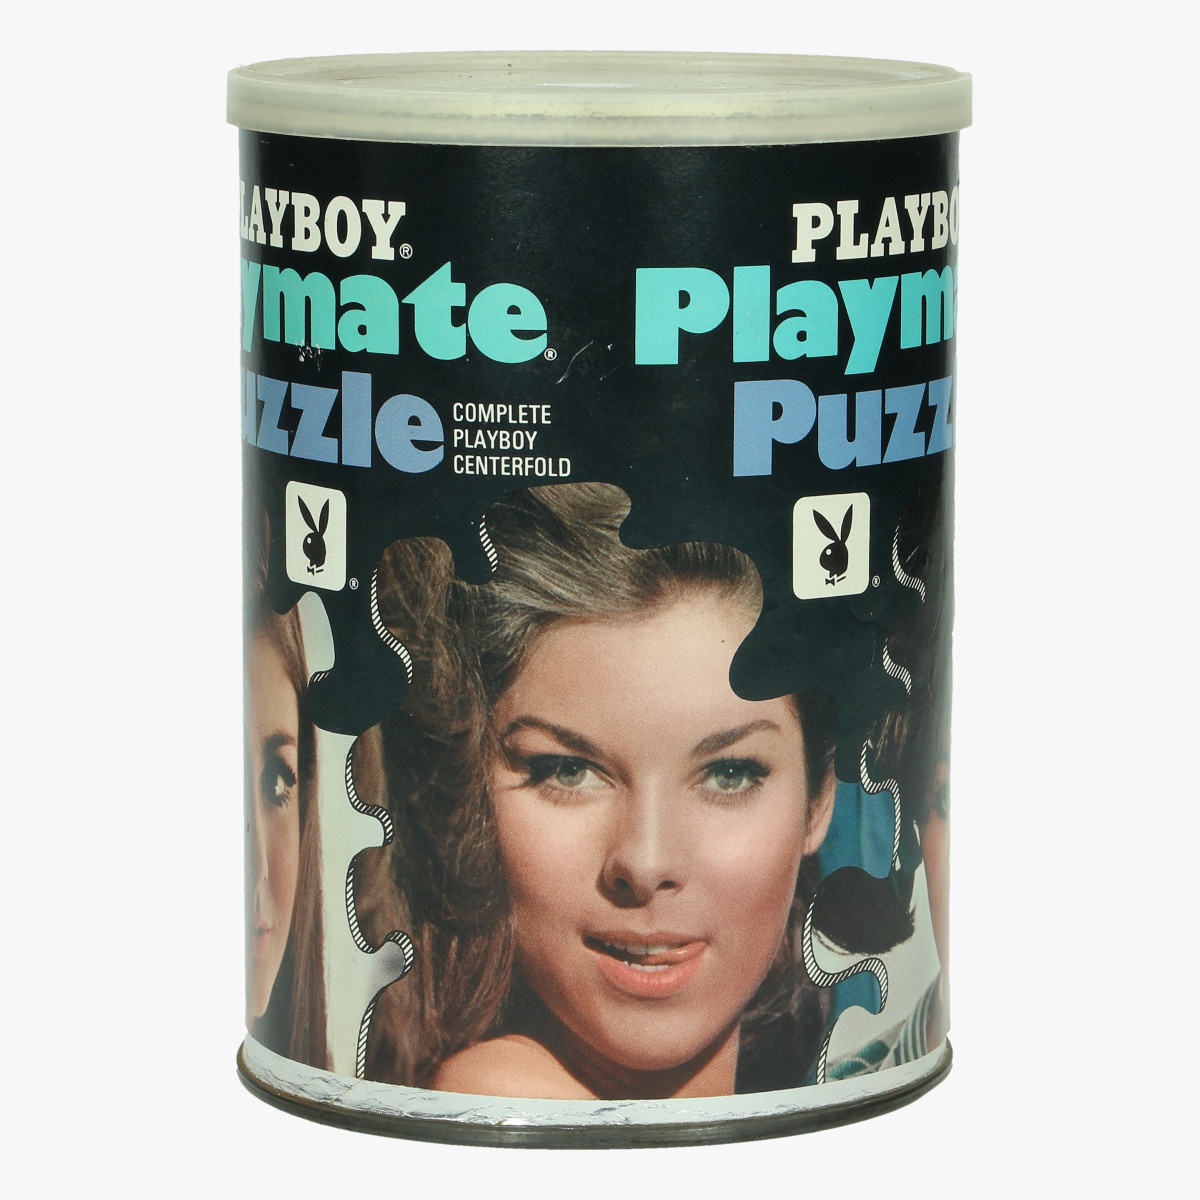 Afbeeldingen van vintage playboy puzzel miss november 1967 paige young produced by american publishing corporation, waltham mass